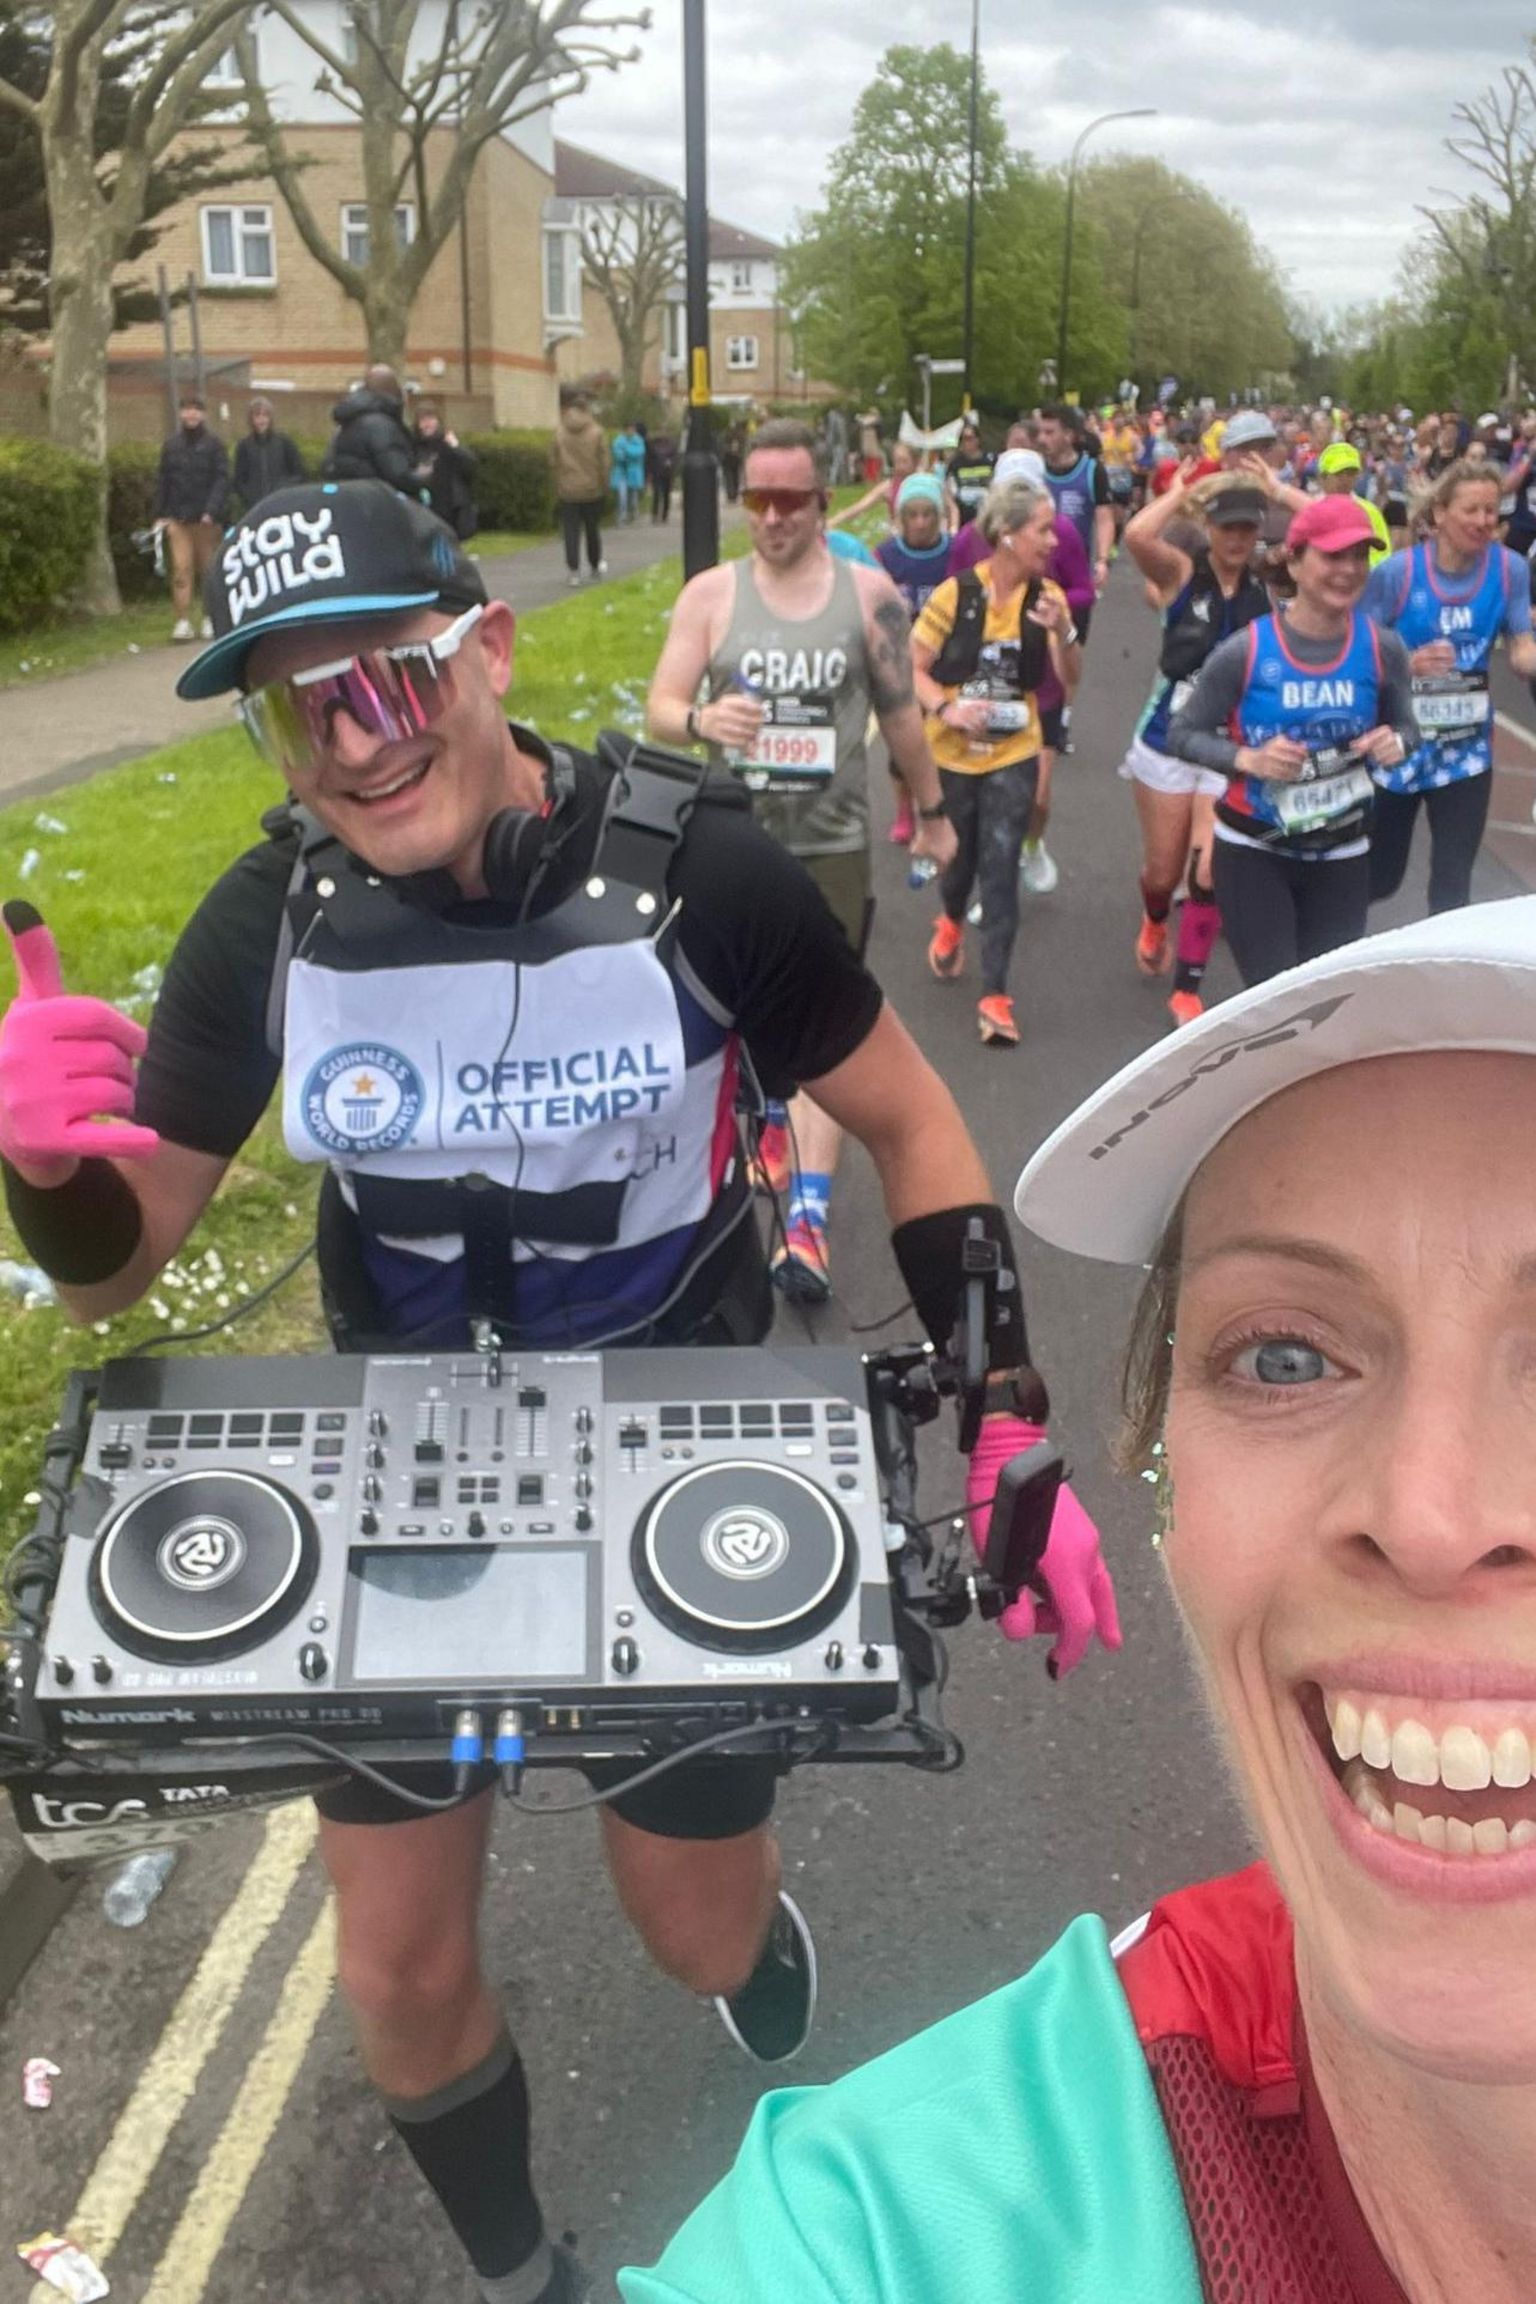 Gus gives a thumbs up to the camera with a pained expression on his face, Emma is taking a selfie of the two of them doing the marathon and she smiles at the camera